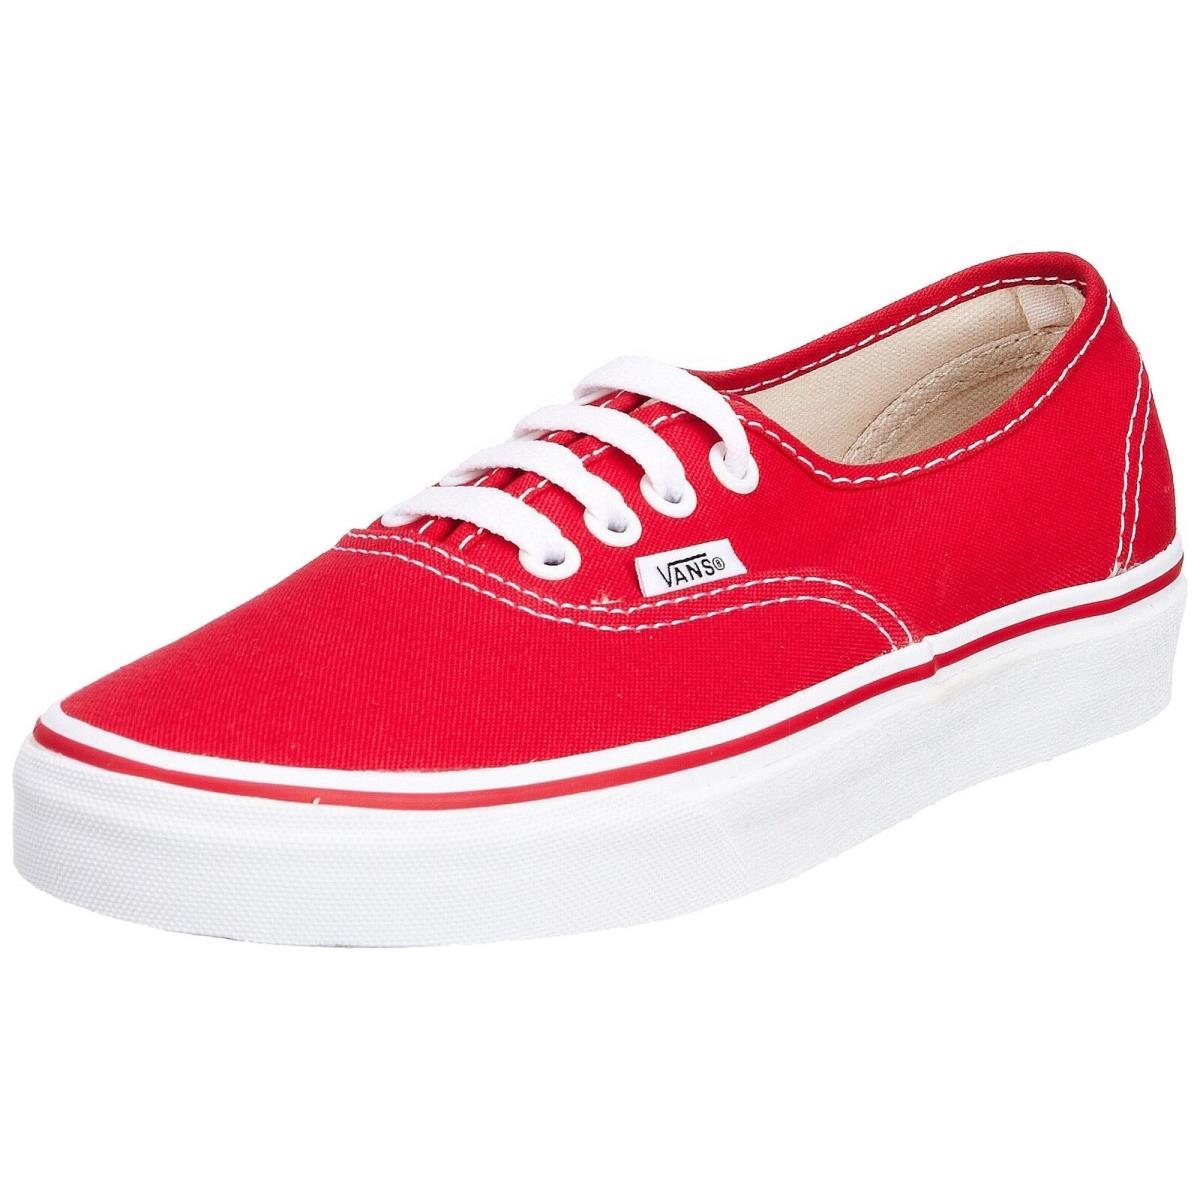 Vans Authentic Sneakers Red - Red